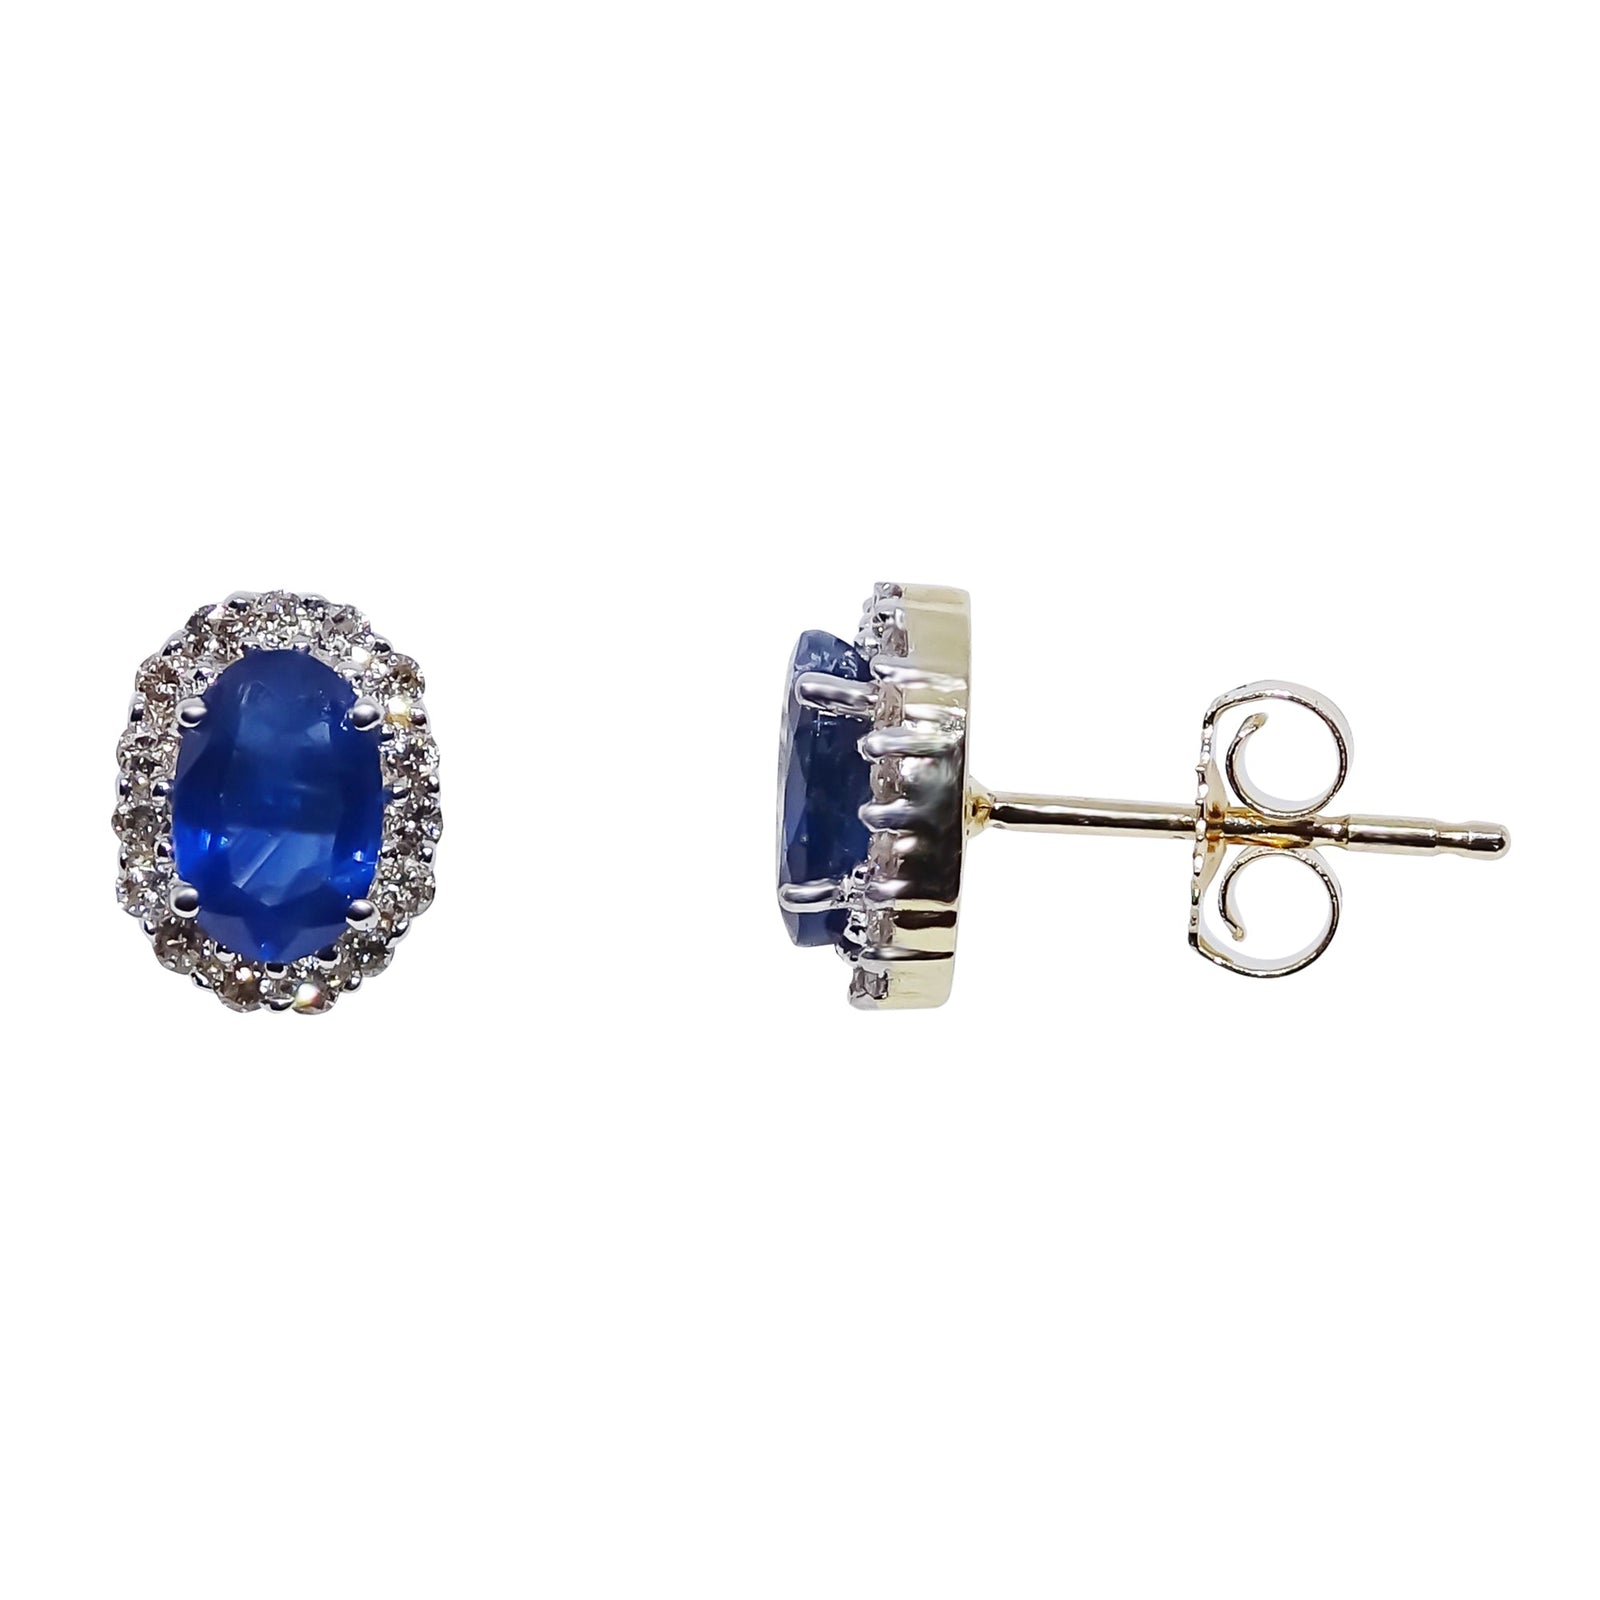 9ct gold 6x4mm oval sapphire & diamond cluster studs earrings 0.22ct